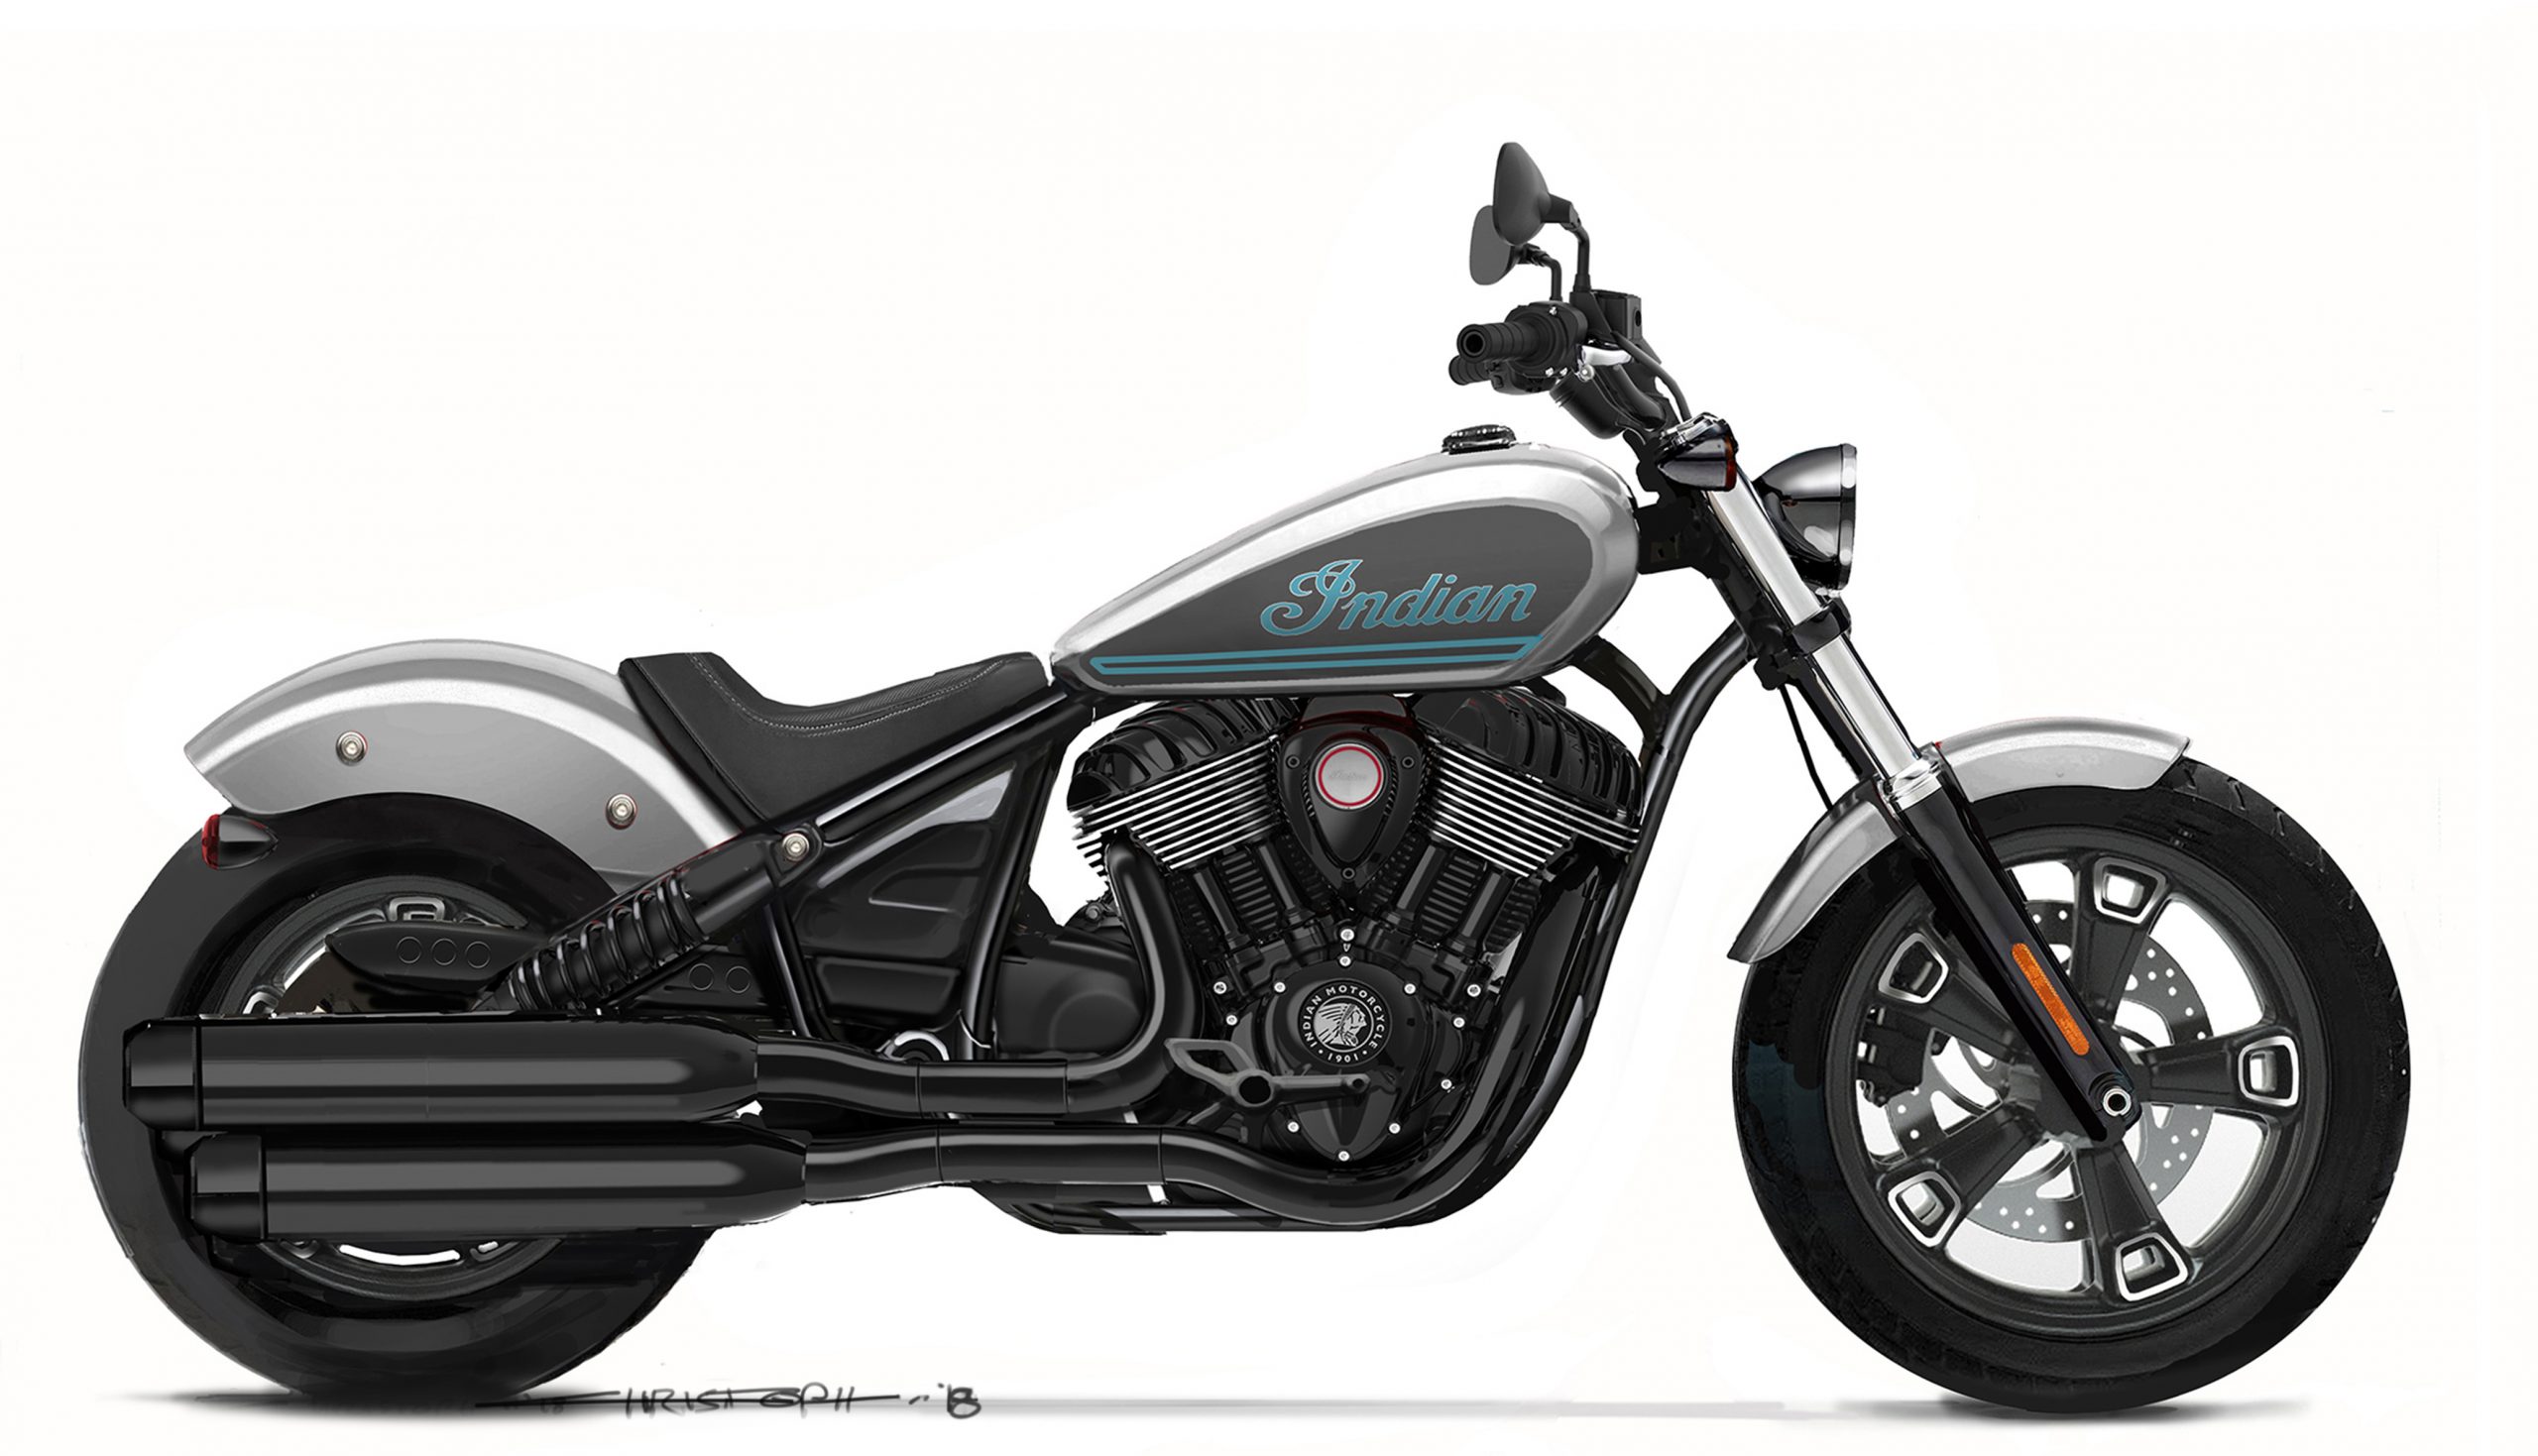 A design drawing of Indian's new 2021 Chief Motorcycle